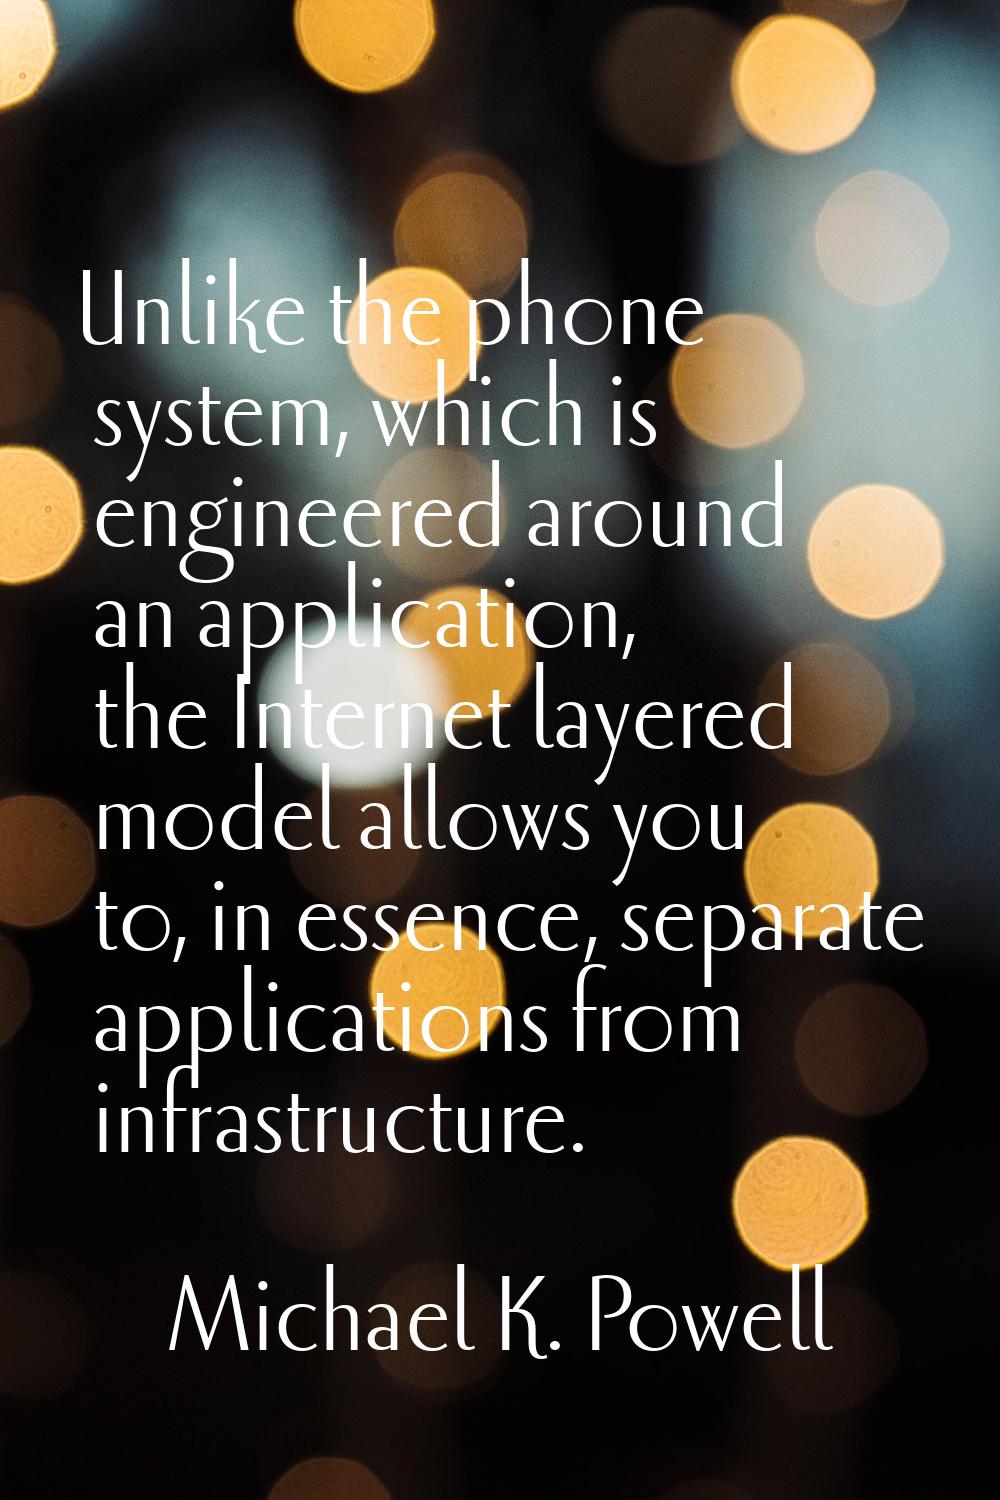 Unlike the phone system, which is engineered around an application, the Internet layered model allo